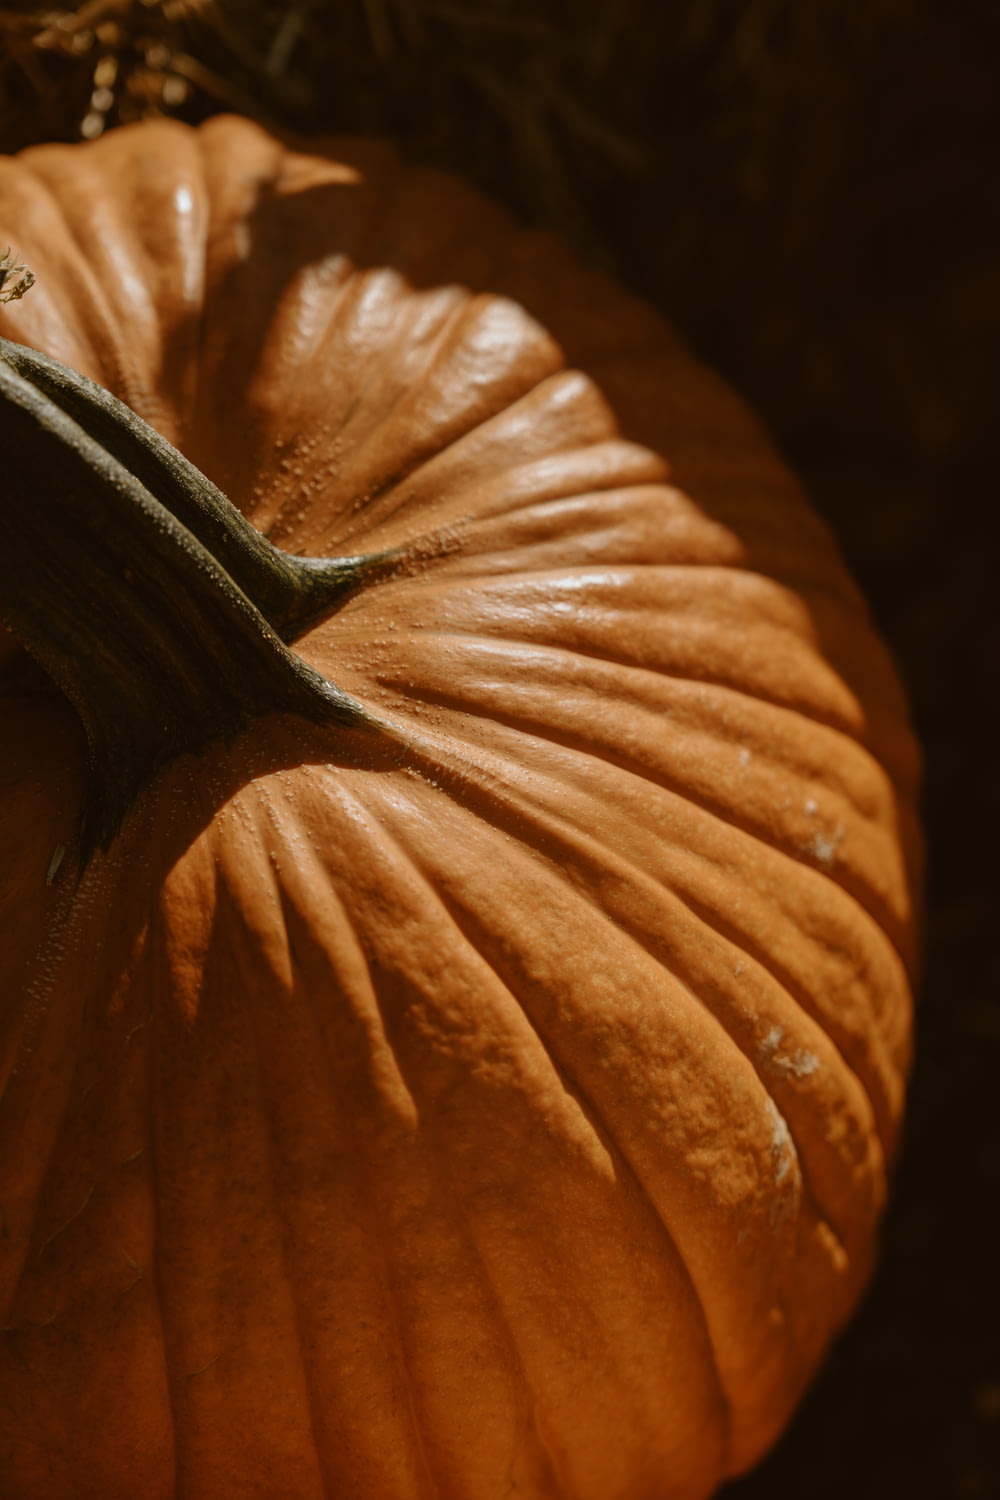 a close up of a pumpkin on the ground